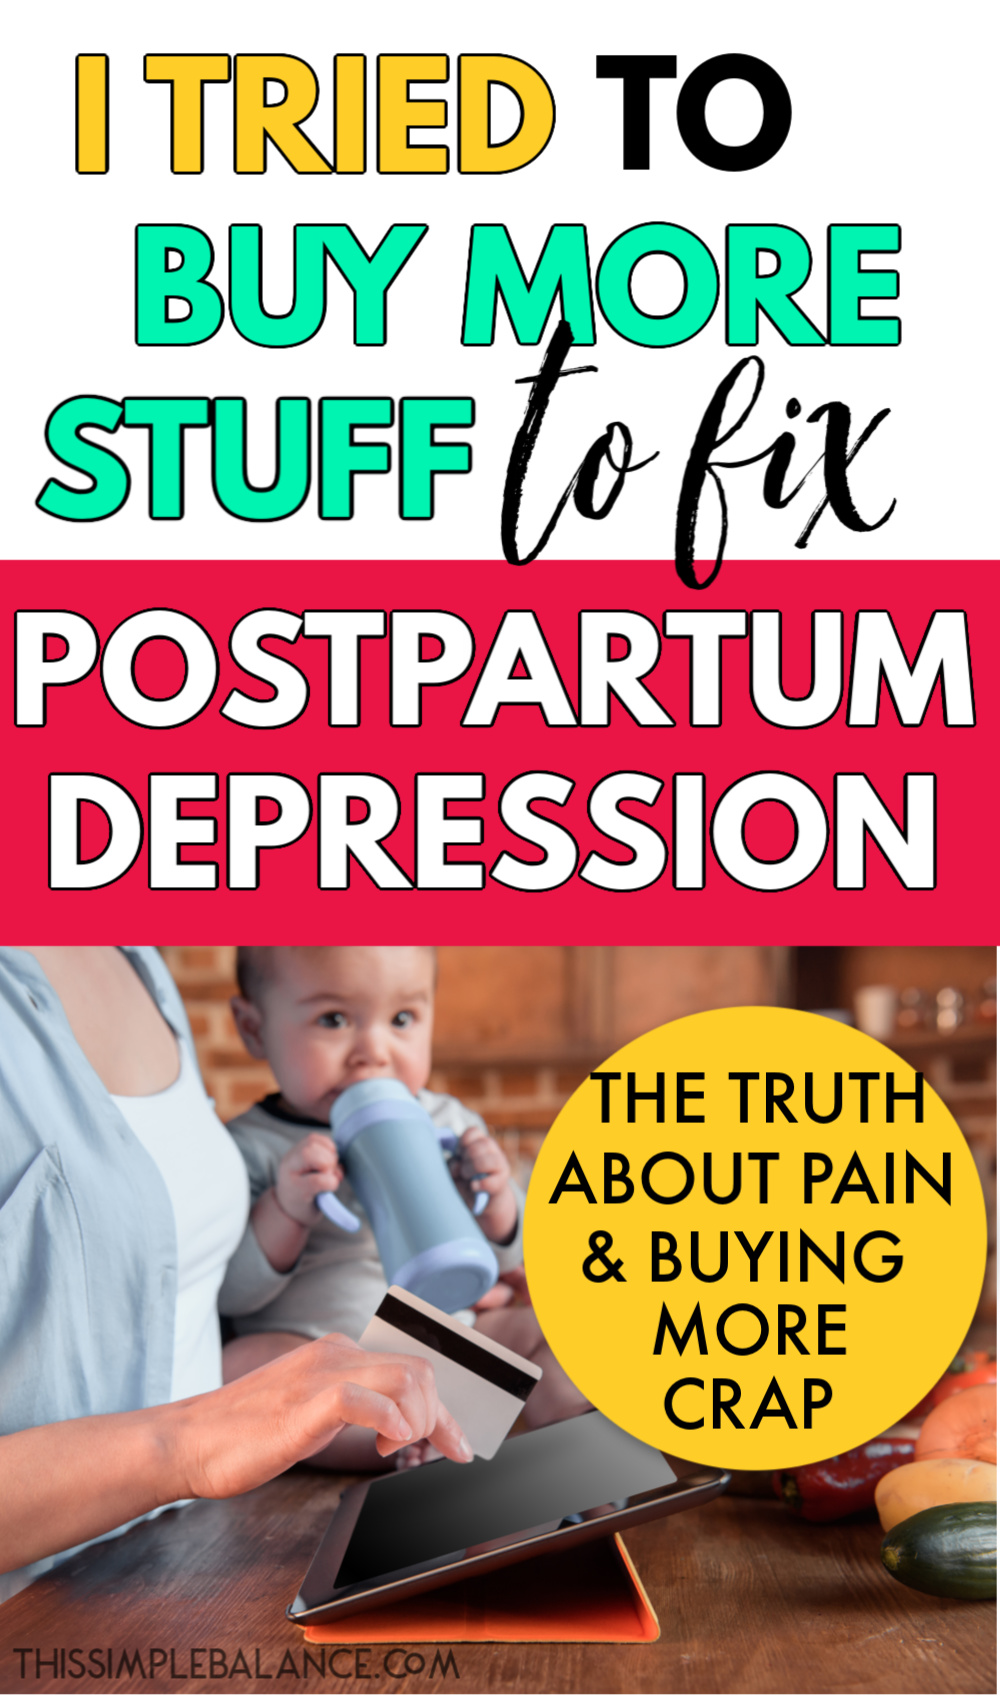 young mom holding baby in one arm on kitchen table buying something on a tablet, with text overlay, "I tried to buy more stuff to fix postpartum depression - the truth about pain & buying more crap"